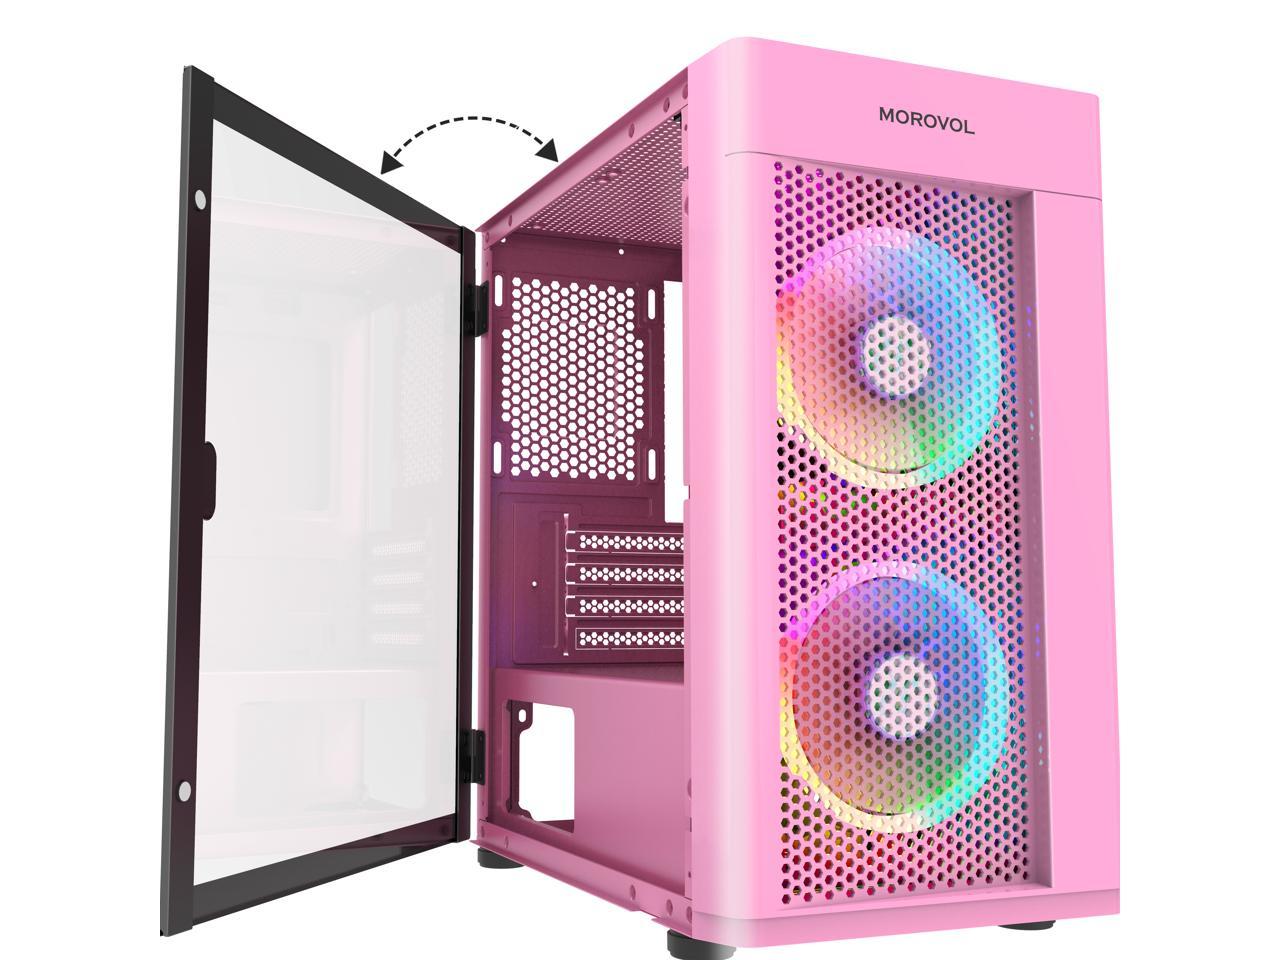 MOROVOL MESH Micro ATX Tower 2 PCS 120MM ARGB Fans Computer Case USB 3.0  Ports Opening Tempered Glass Panel & Mesh Front Panel Airflow Gaming PC  Case 